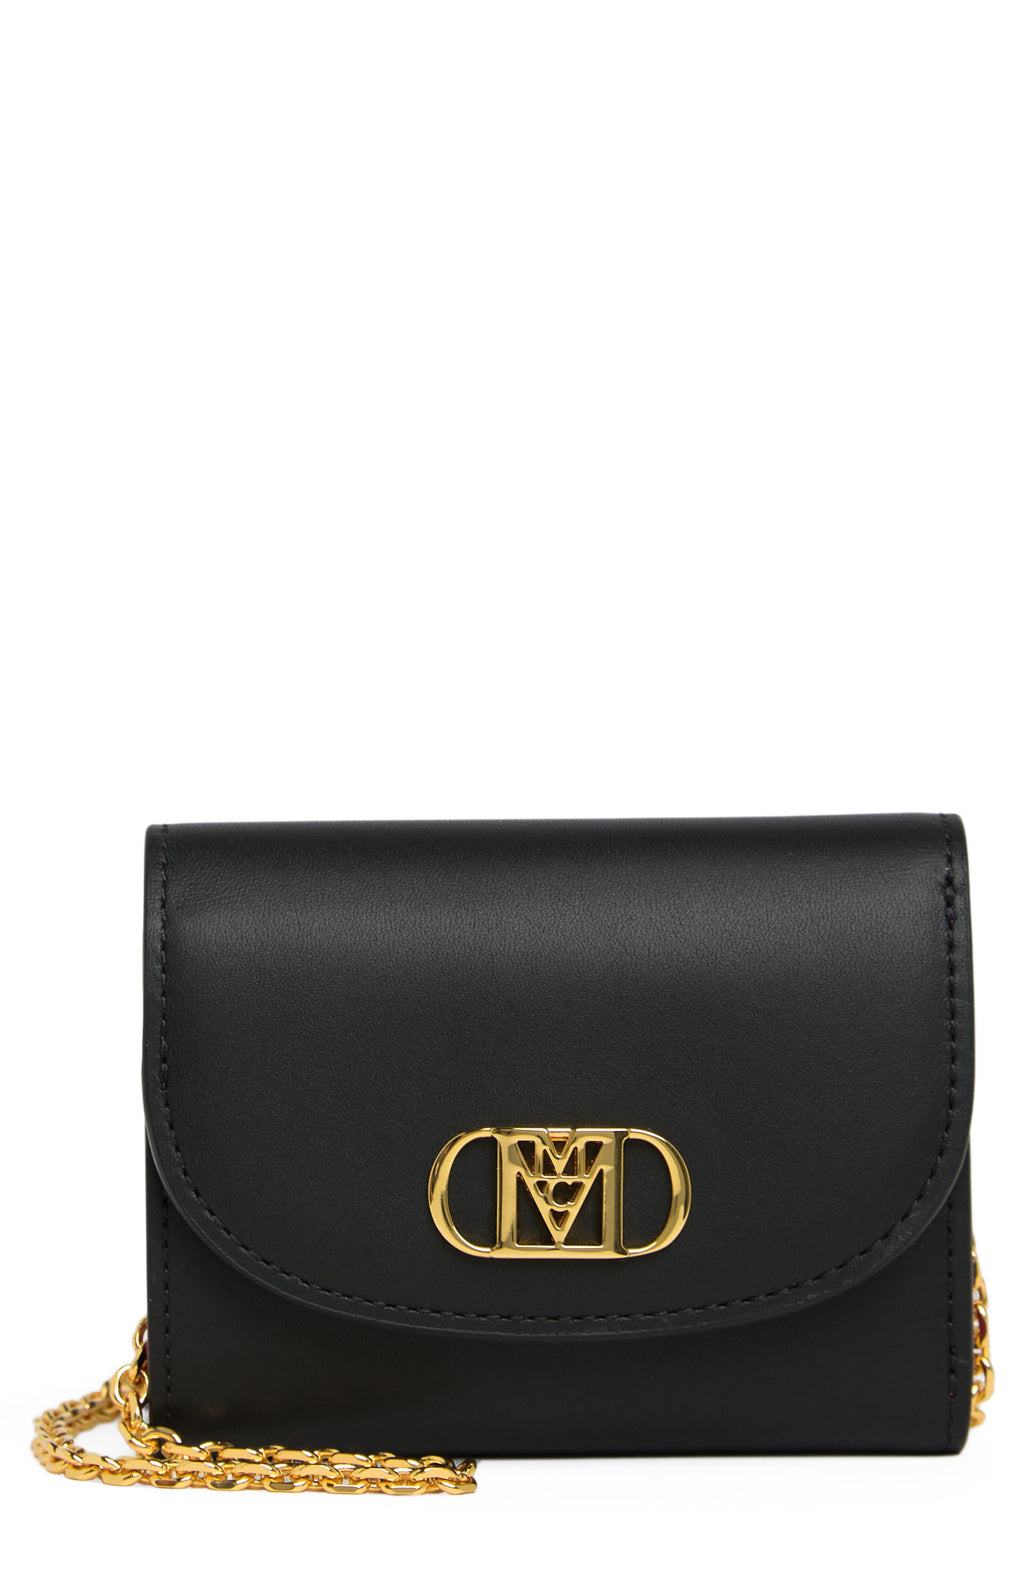 MCM Mode Travia Leather Chain Wallet, Main, color, BLACK